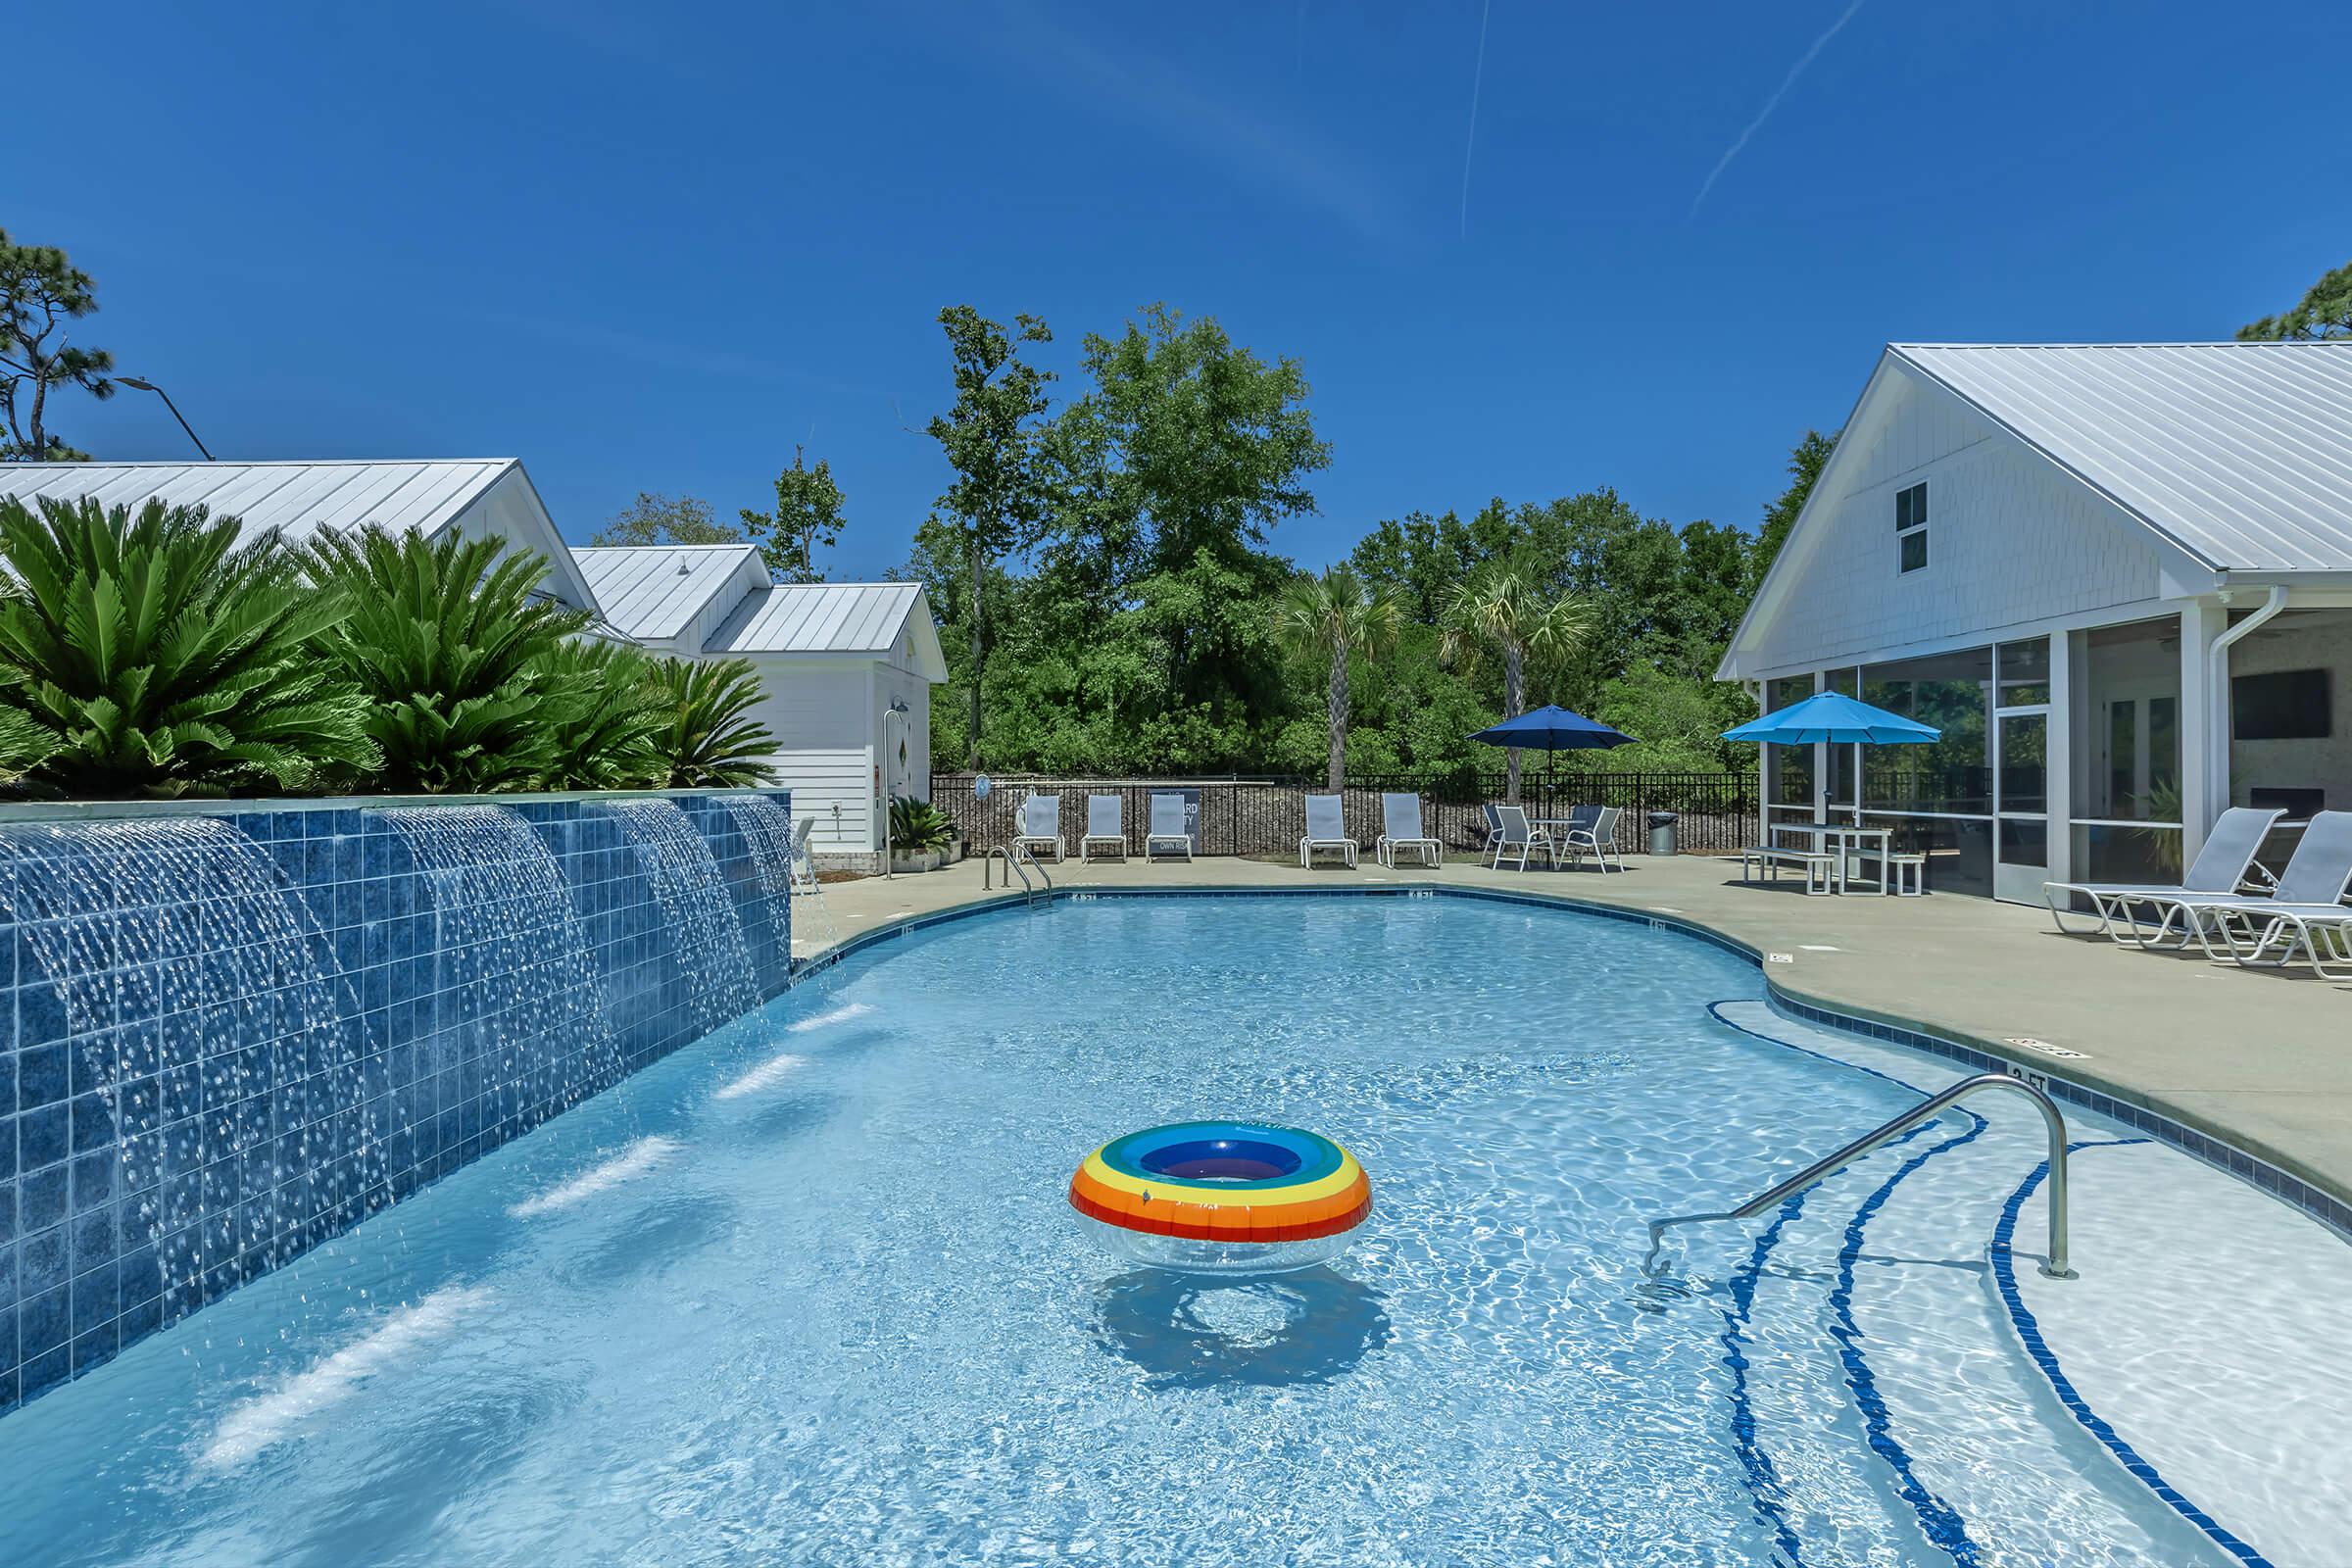 TAKE A DIP IN OUR SALTWATER POOL WITH WATERFALL